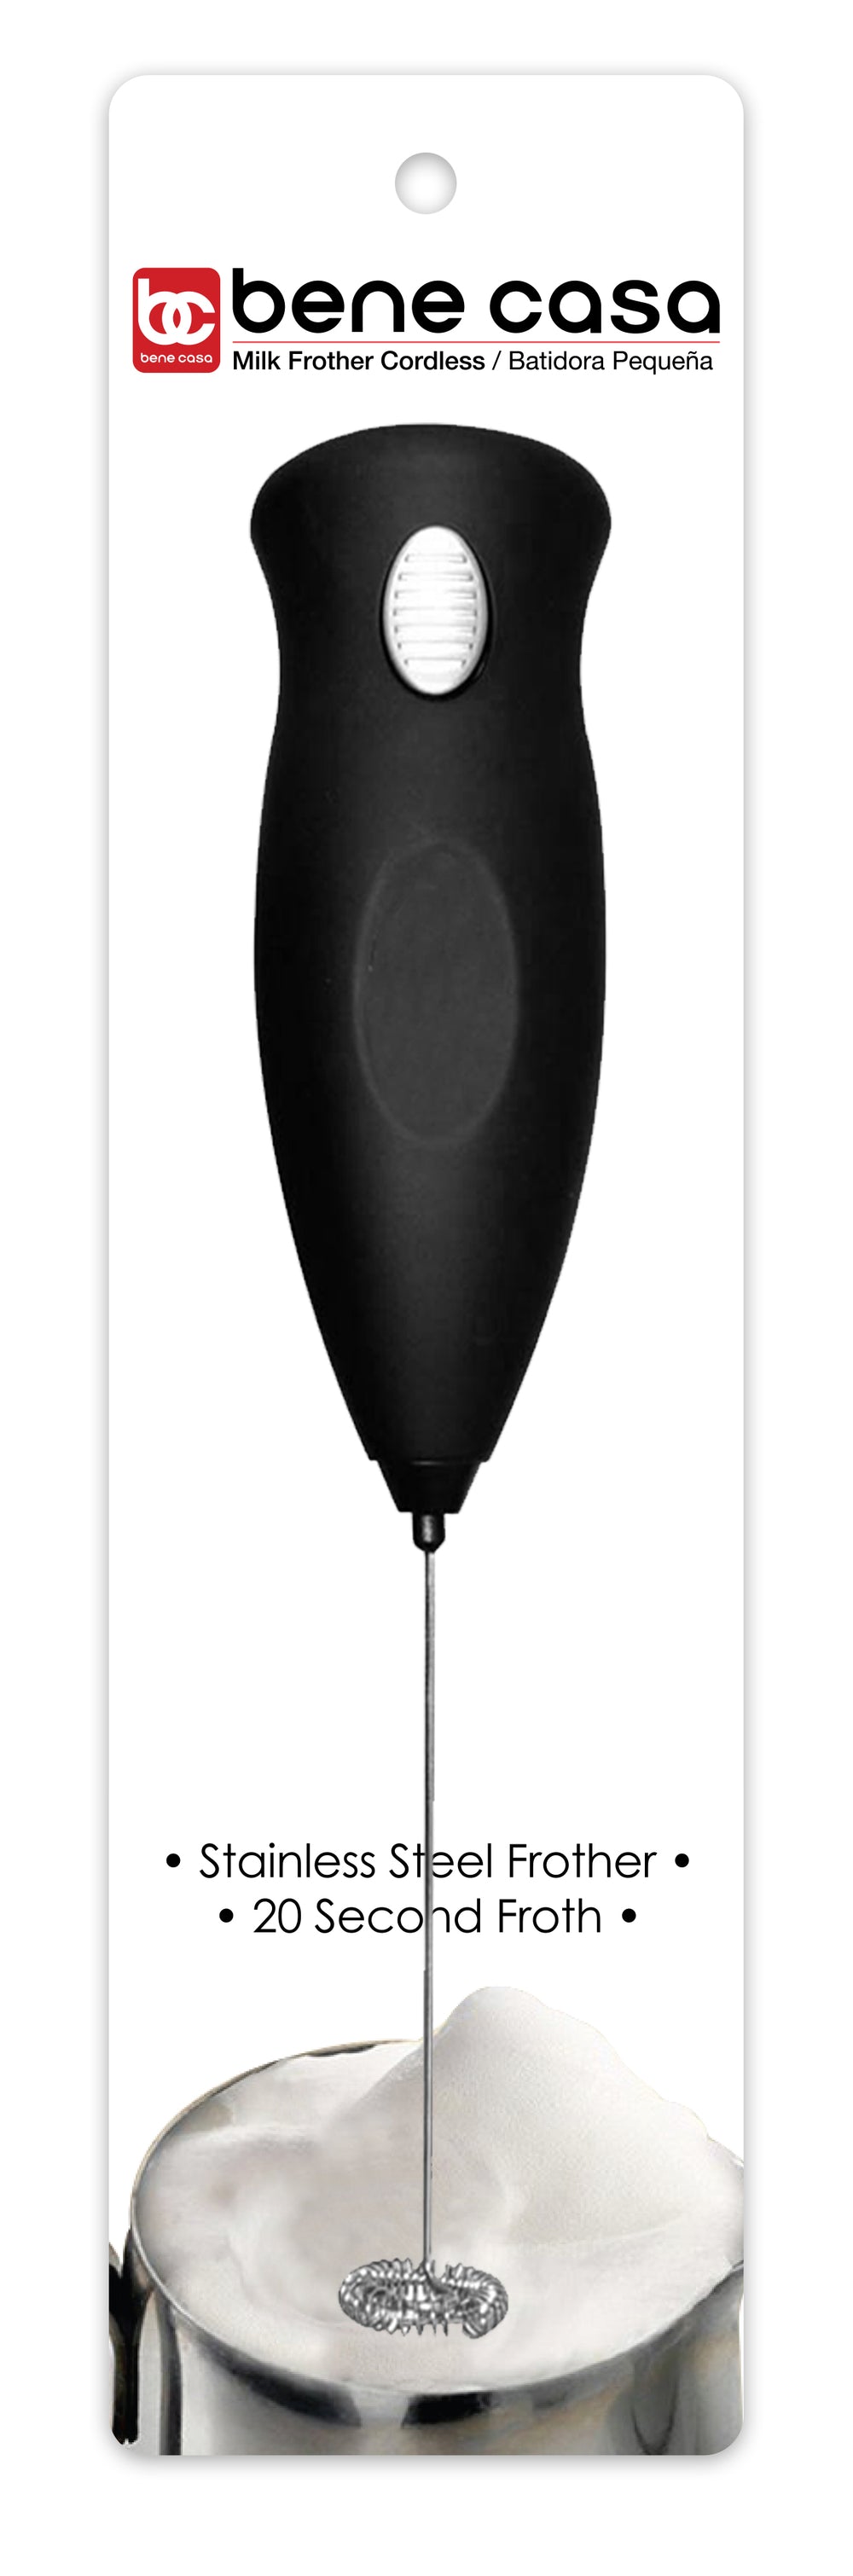 Bene Casa cordless milk frother, hot and cold milk frother, portable, easy grip